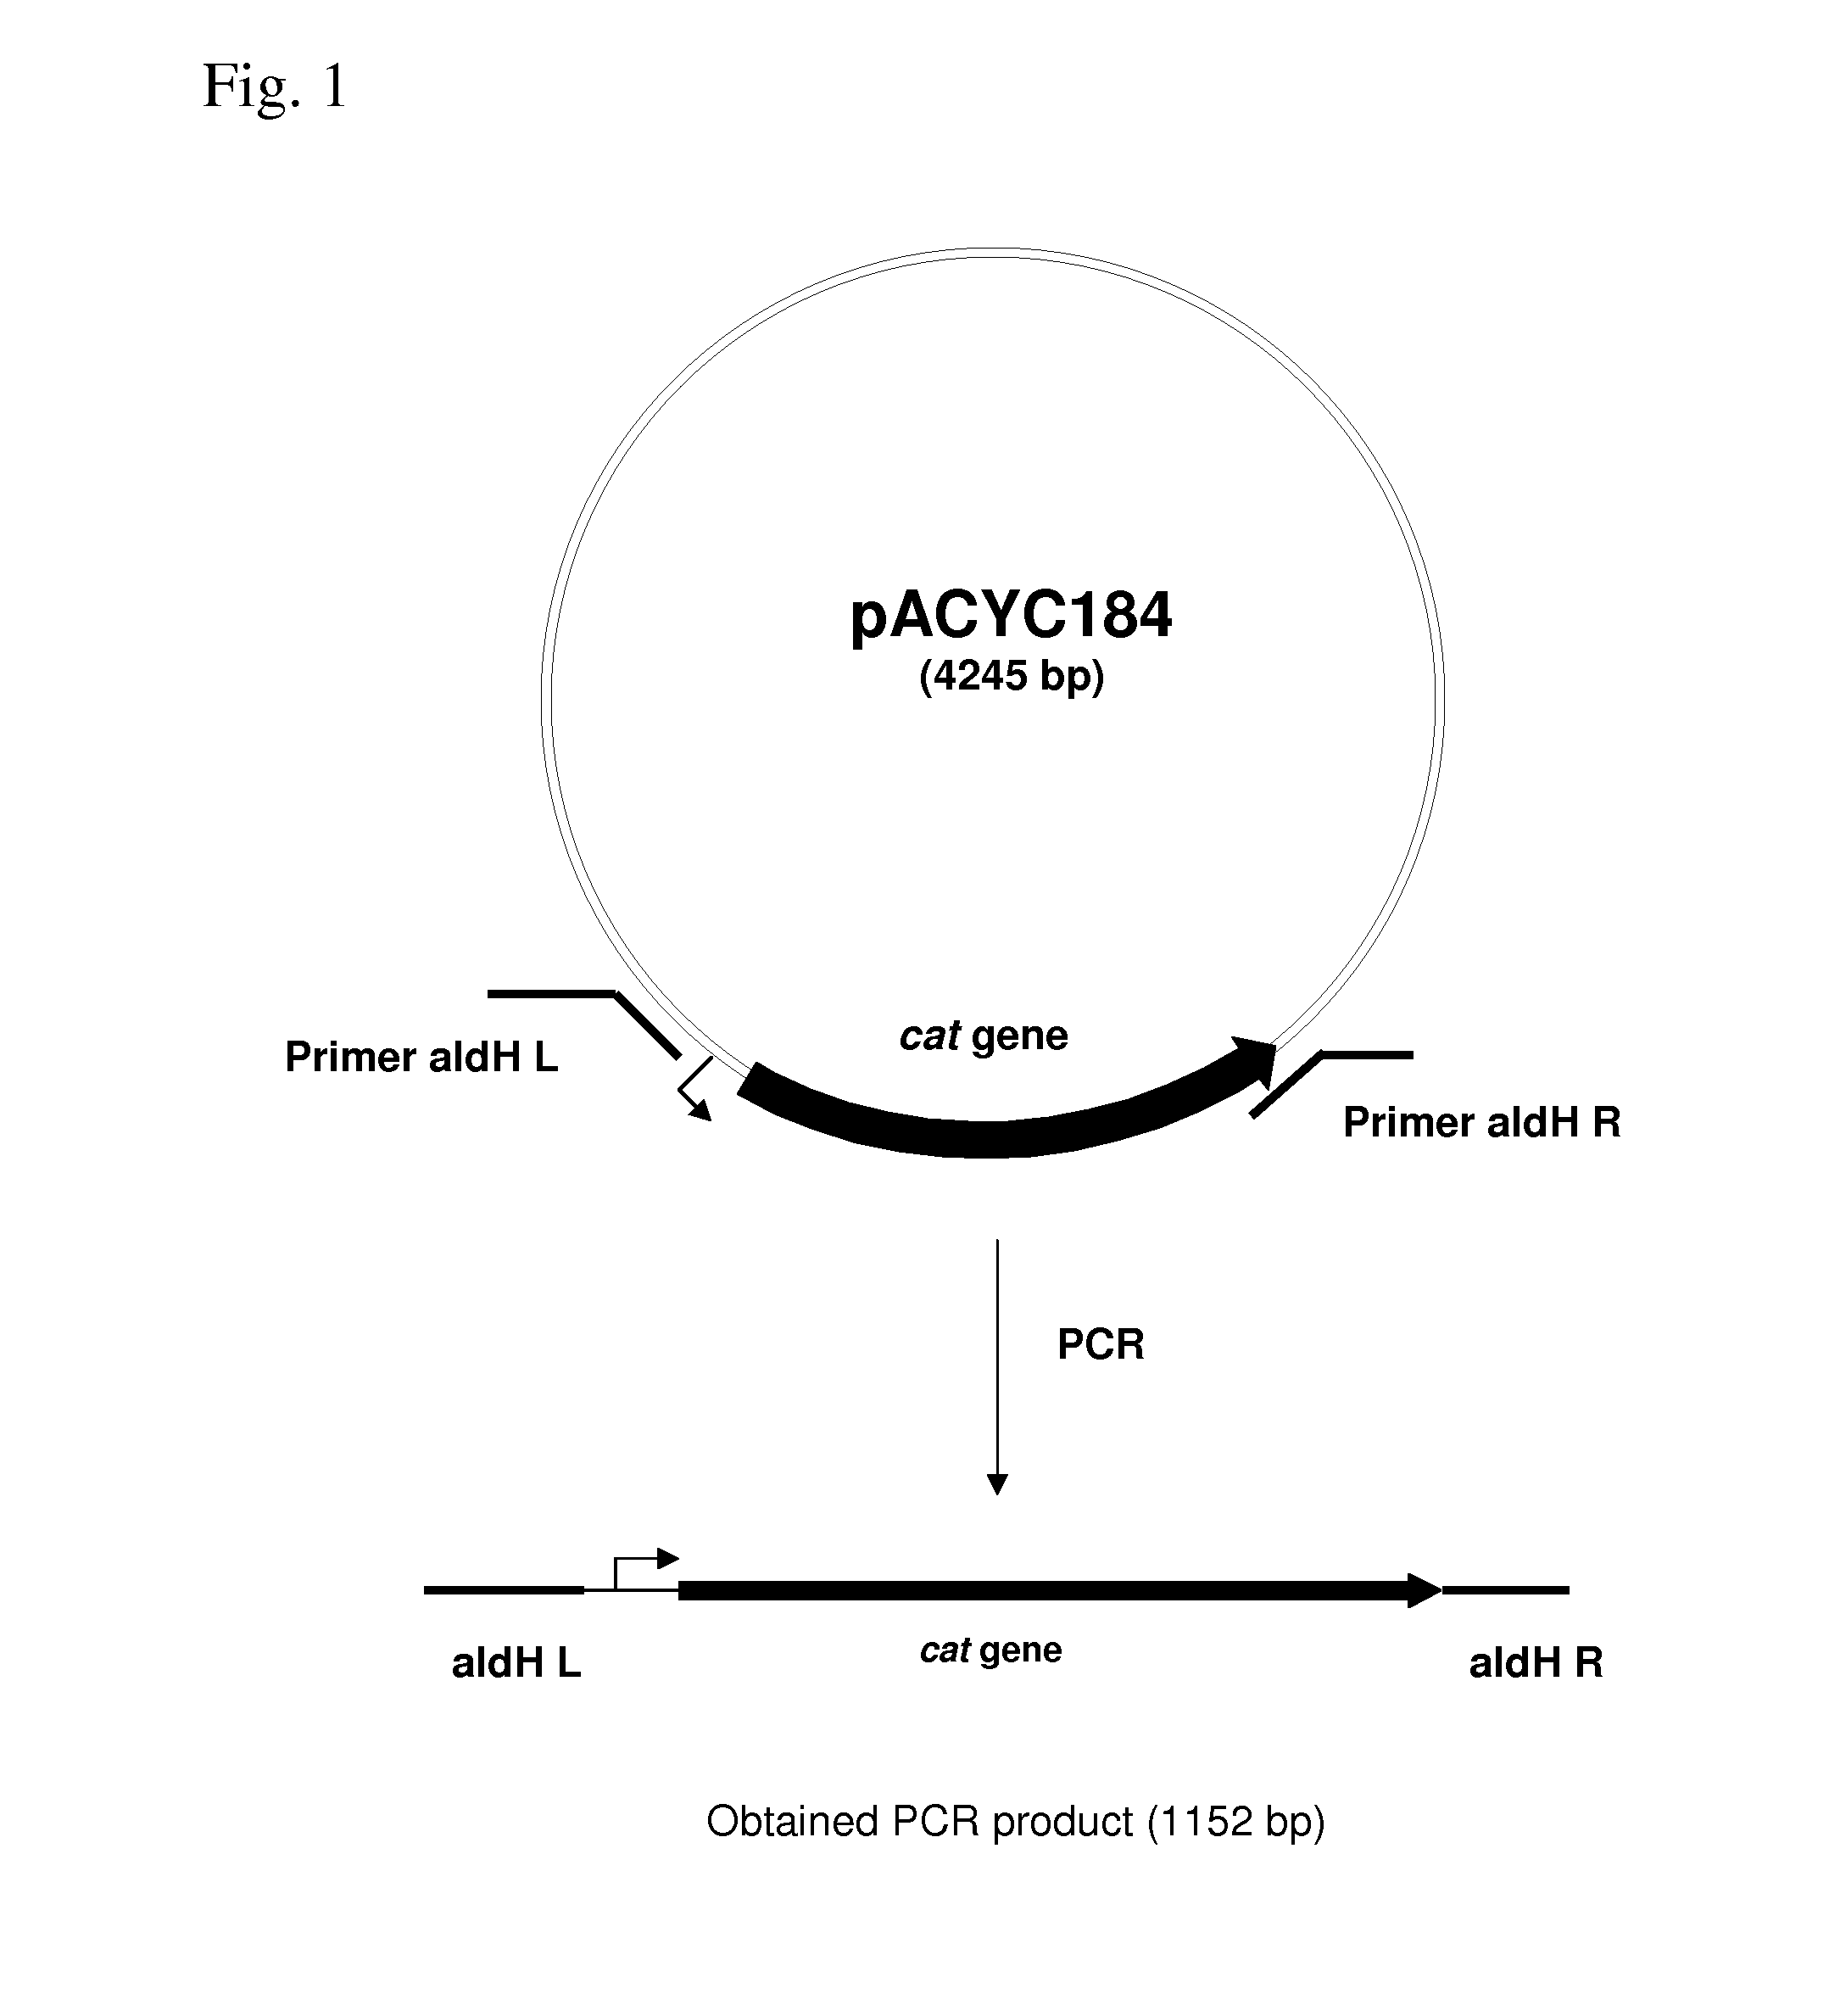 METHOD FOR PRODUCING AN L-AMINO ACID USING A BACTERIUM OF ENTEROBACTERIACEAE FAMILY WITH ATTENUATED EXPRESSION OF THE aldH GENE